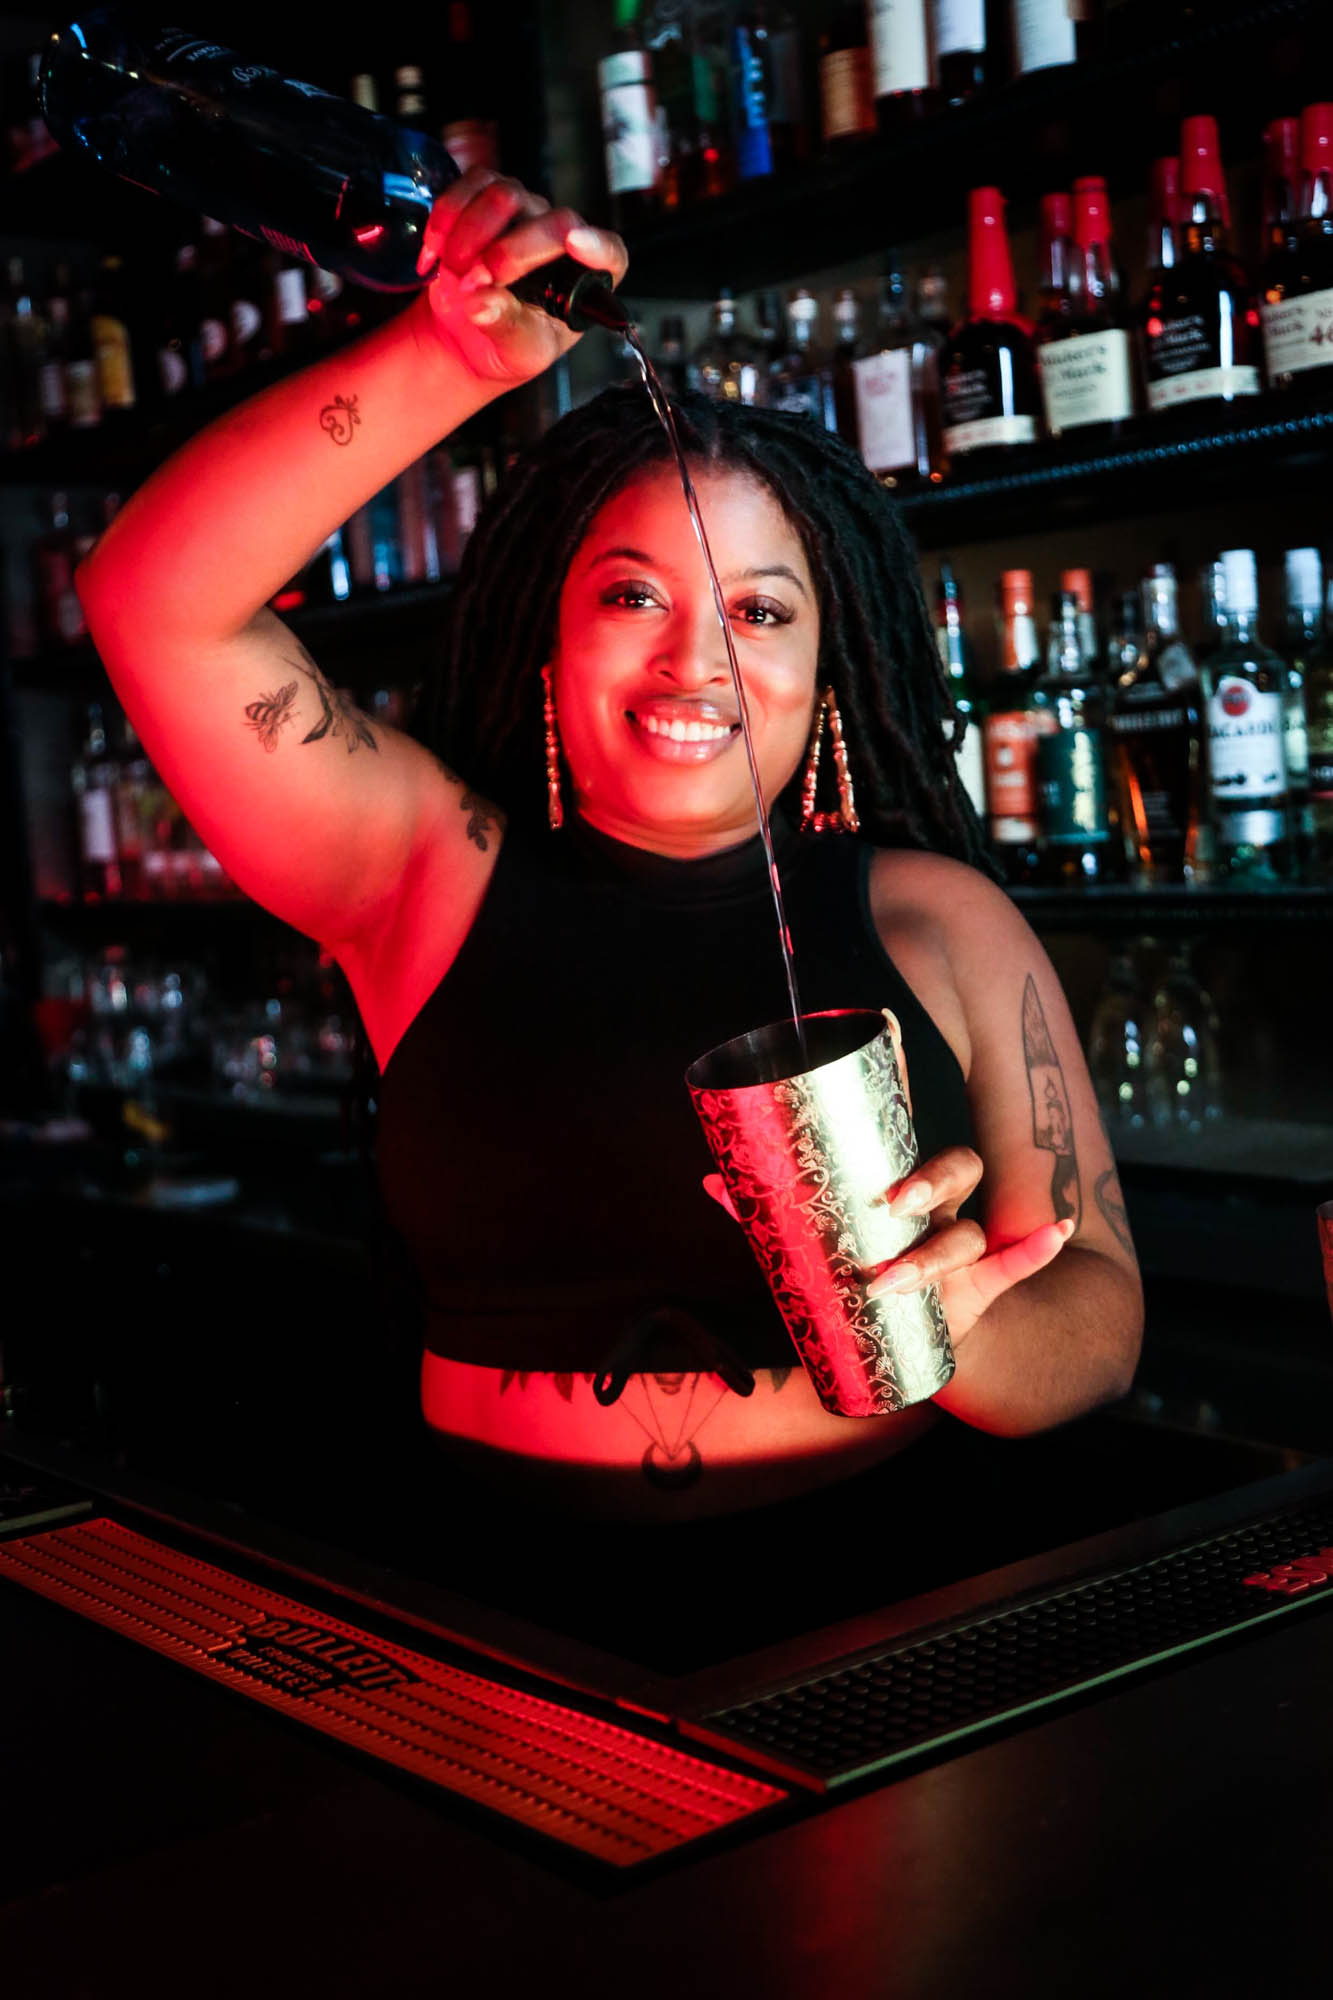 Bar staff smiling, looking at the camera and pouring a drink in shaker photo